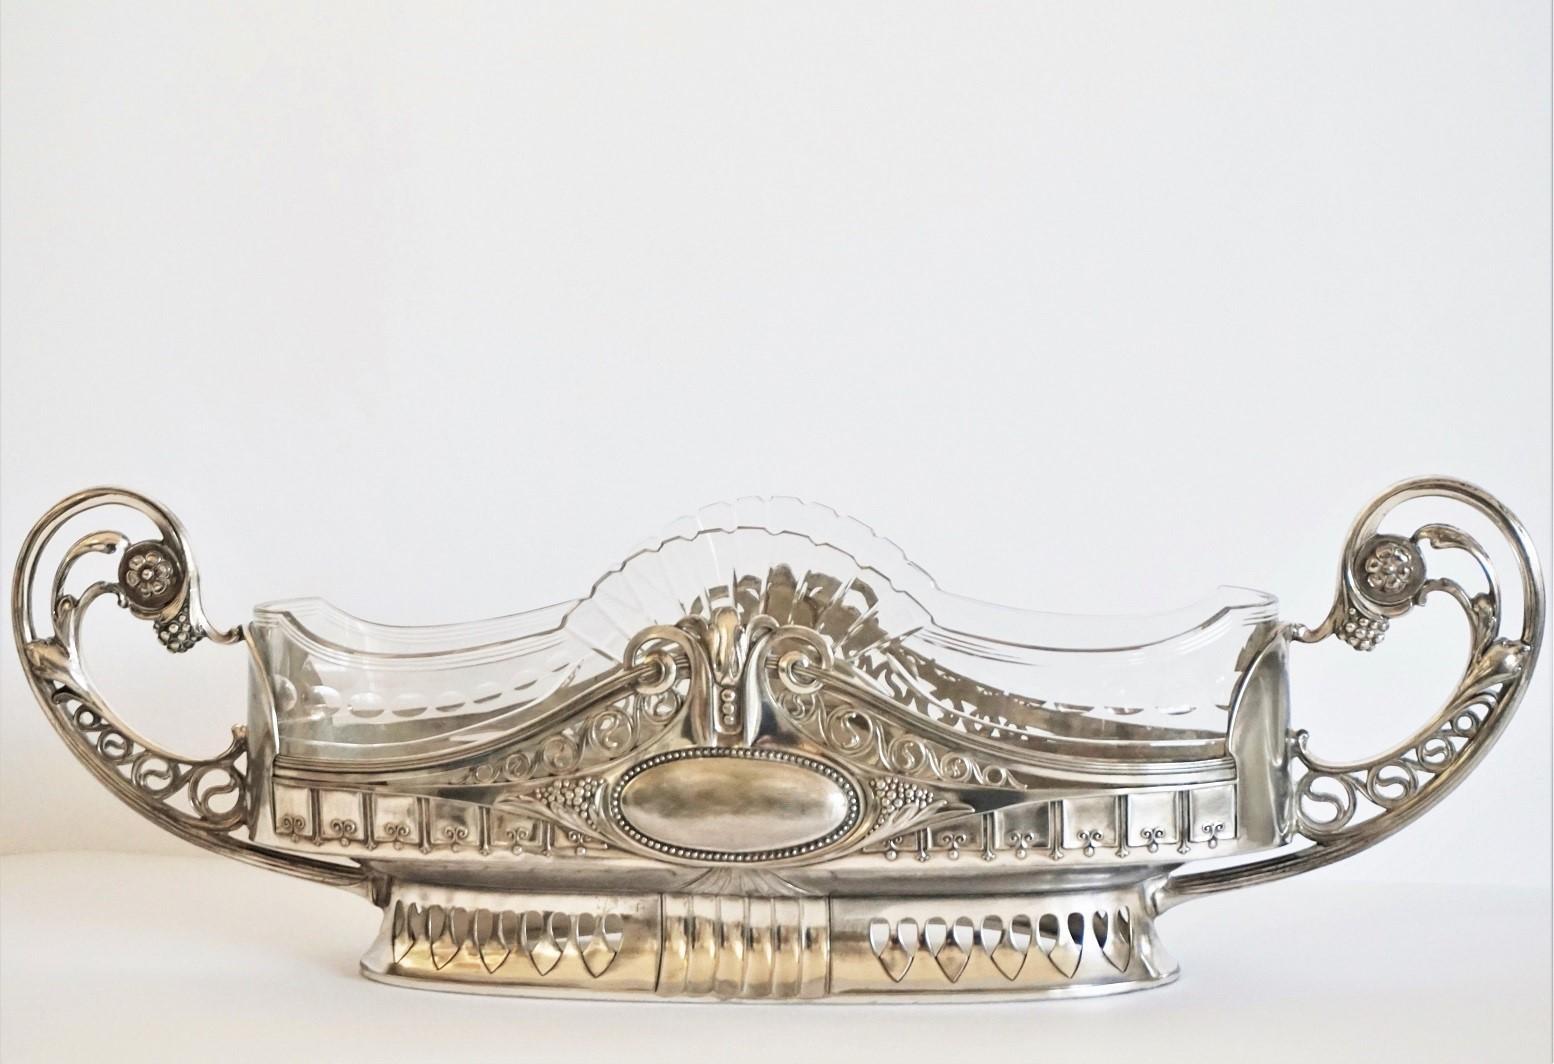 Large silver Art Nouveau period centrepiece/jardinière with original cut crystal glass liner, Austria 1900-1910. This wonderful and unique centrepiece has an oval form with elaborate handmade details. The crystal bowl is decorated with cut linear